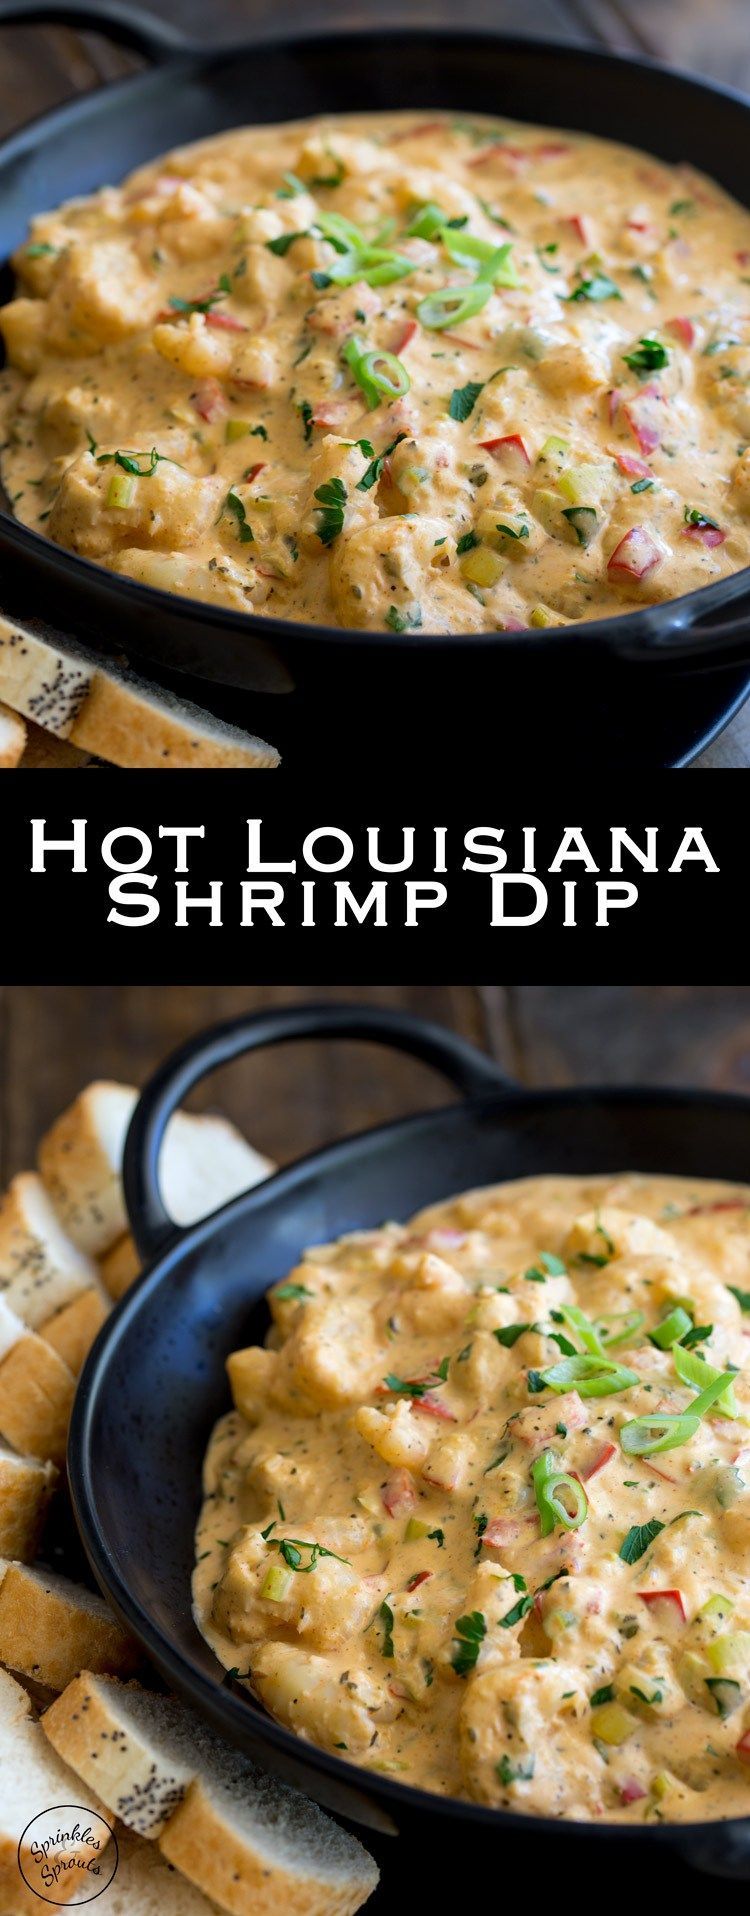 Succulent juicy shrimp, cooked with traditional creole flavours and luscious creamy cheese and cream. This Hot Louisiana Shrimp